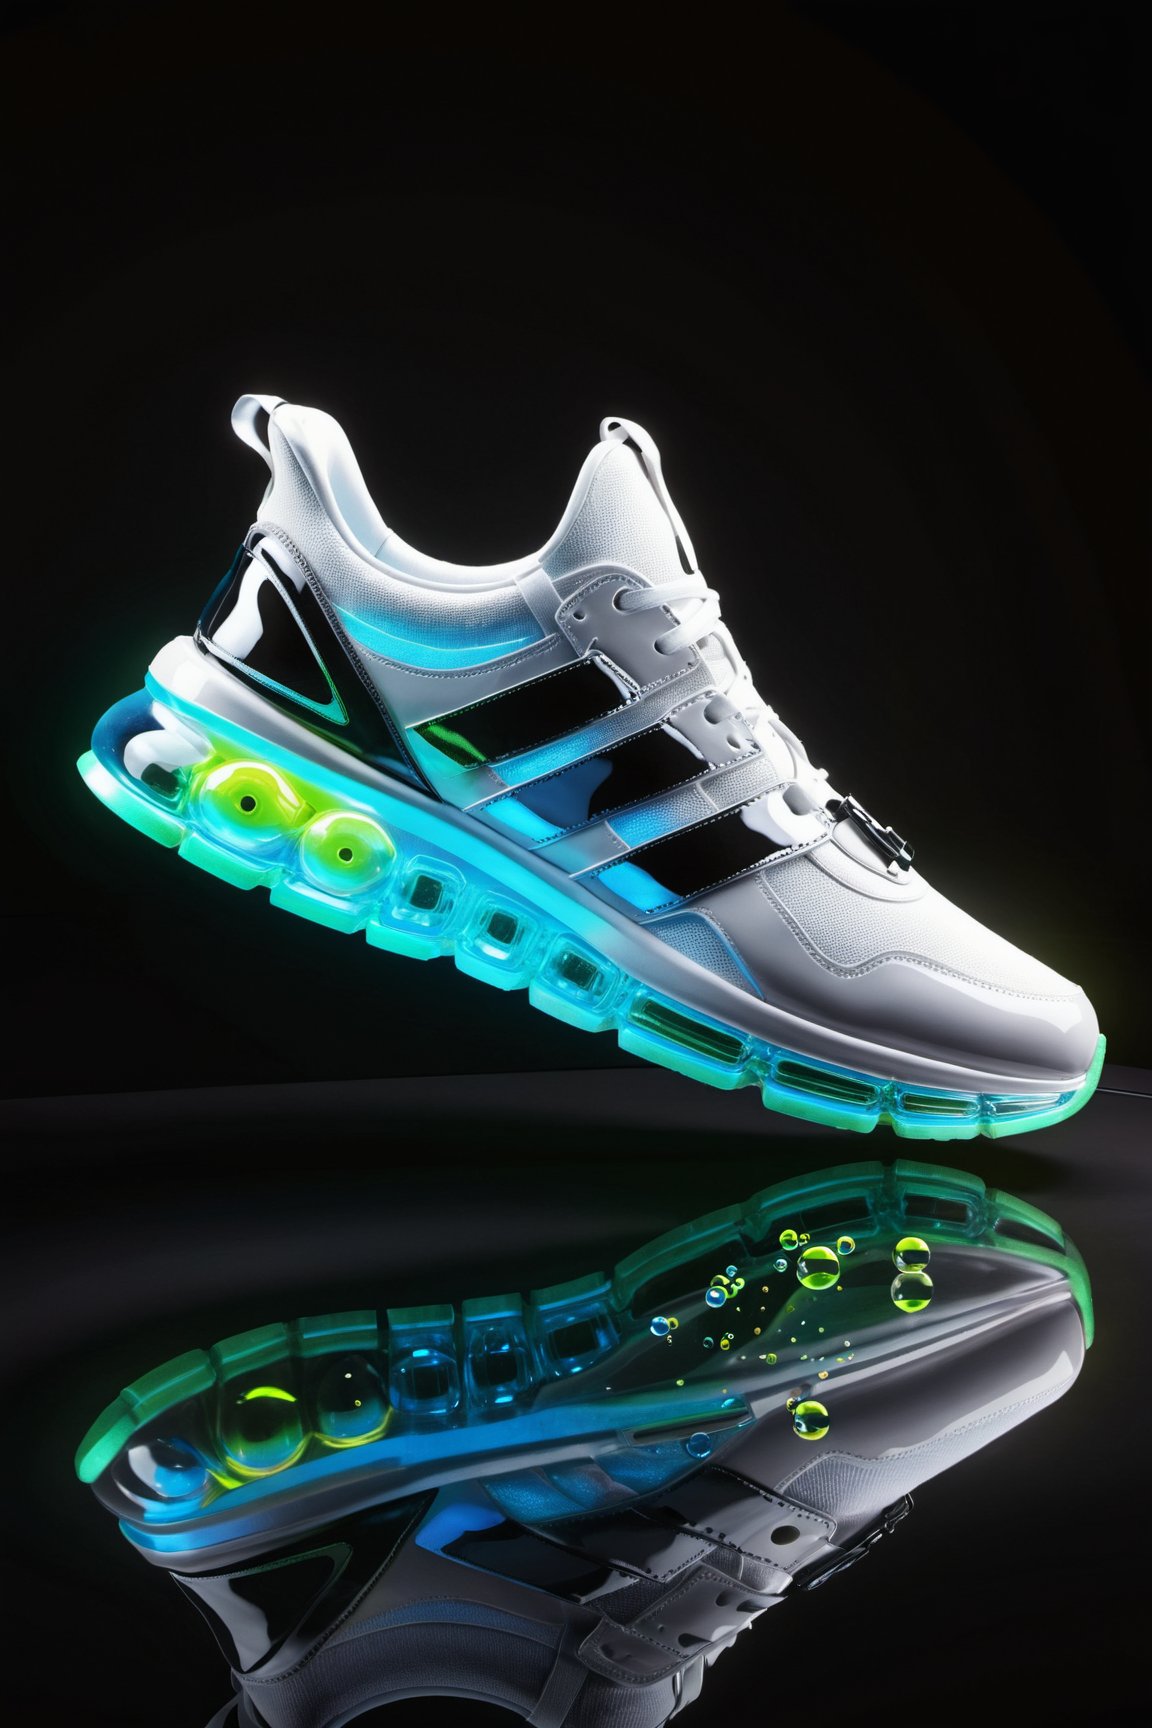 (best quality,4k,highres,masterpiece:1.2),ultra-detailed,(realistic:1.37),sneakers,bioluminescent,bright luminescence white light,made out of light beams,bubbles,particles,sparkles,glitch,neon blue and green,glowing soles,reflective surfaces,vibrant colors,shimmering effect,fluid motion,colorful psychedelic patterns,translucent material,mirrored reflections,sleek design,dynamic angles,energetic vibe,sharp focus,illuminated environment,deep shadows,contrasting light and dark,emitting soft glow,light trails,interplay of light and shadow,ethereal atmosphere,immersive experience,interactive visual display,extravagant visual effects,otherworldly aesthetics,mesmerizing presence.

